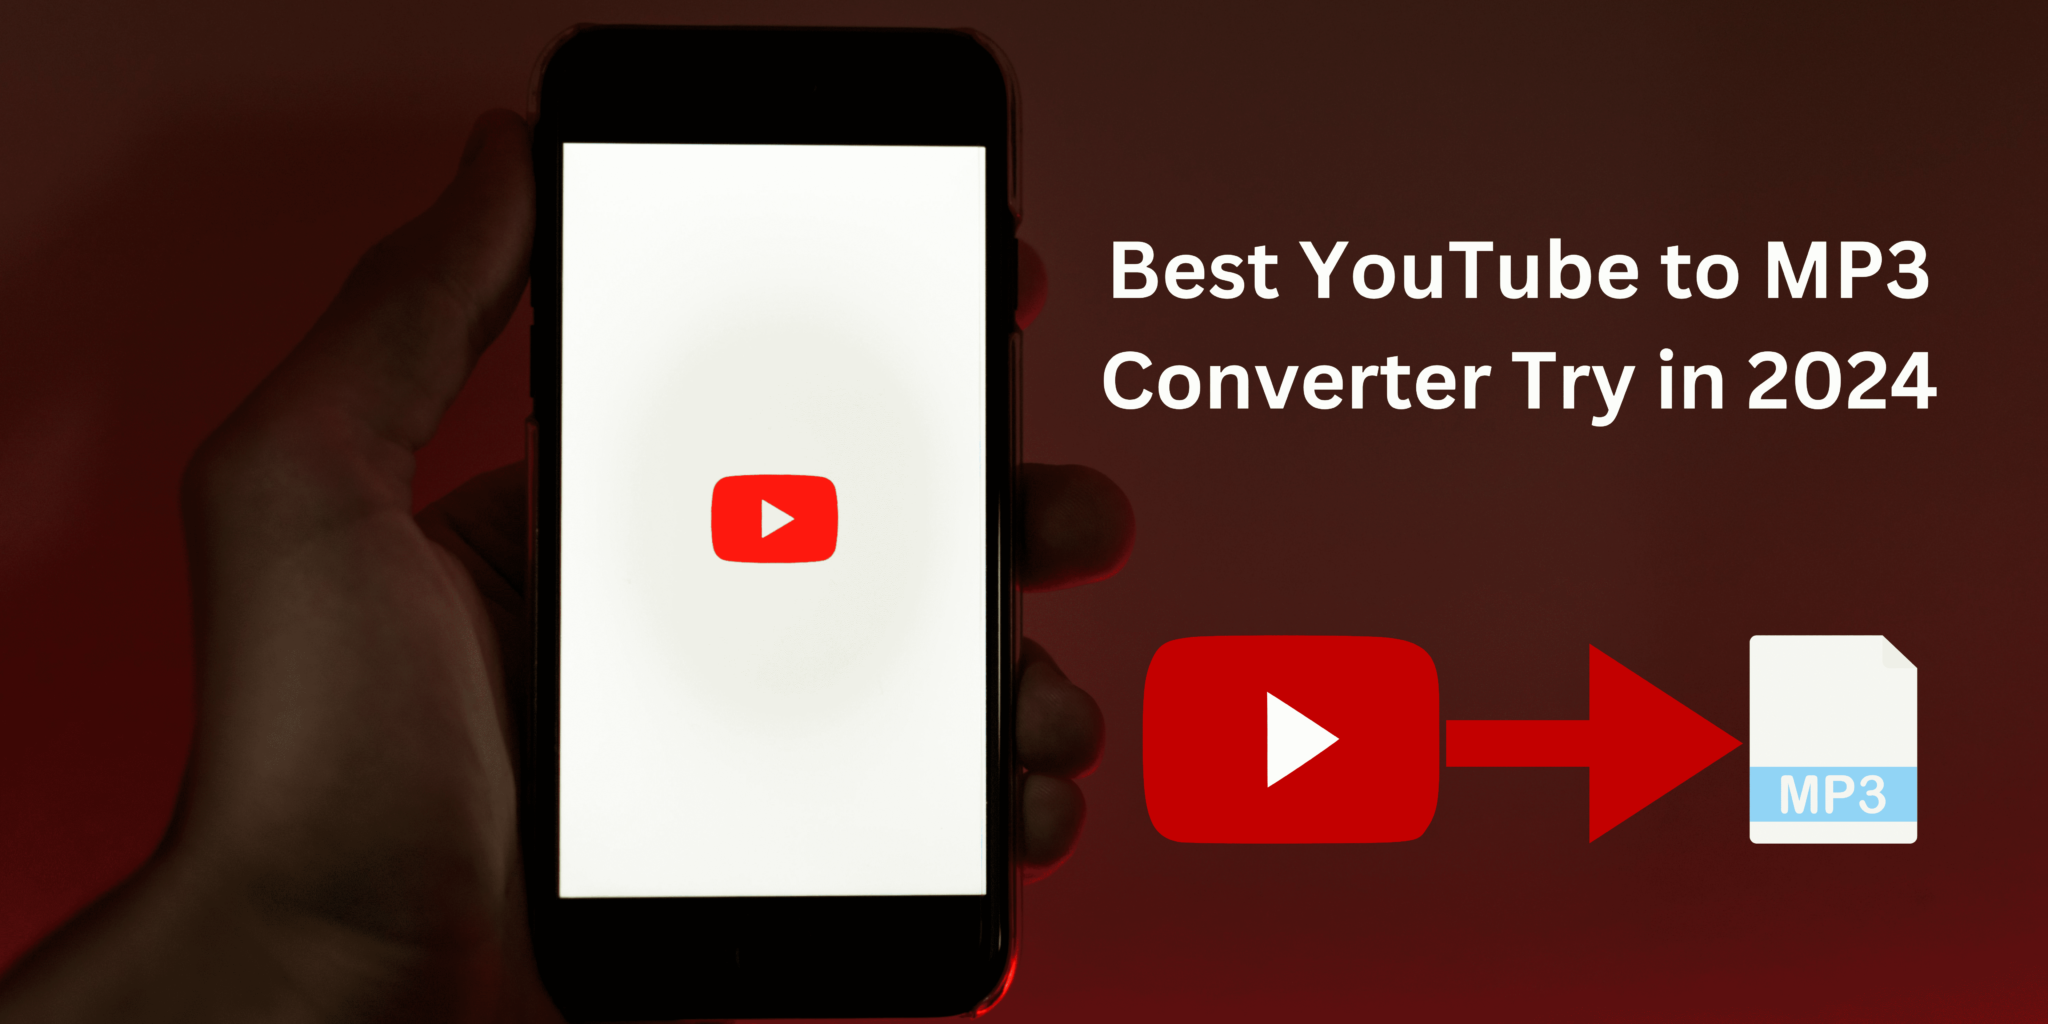 Best YouTube To MP3 Converter Try In 2024 DTW